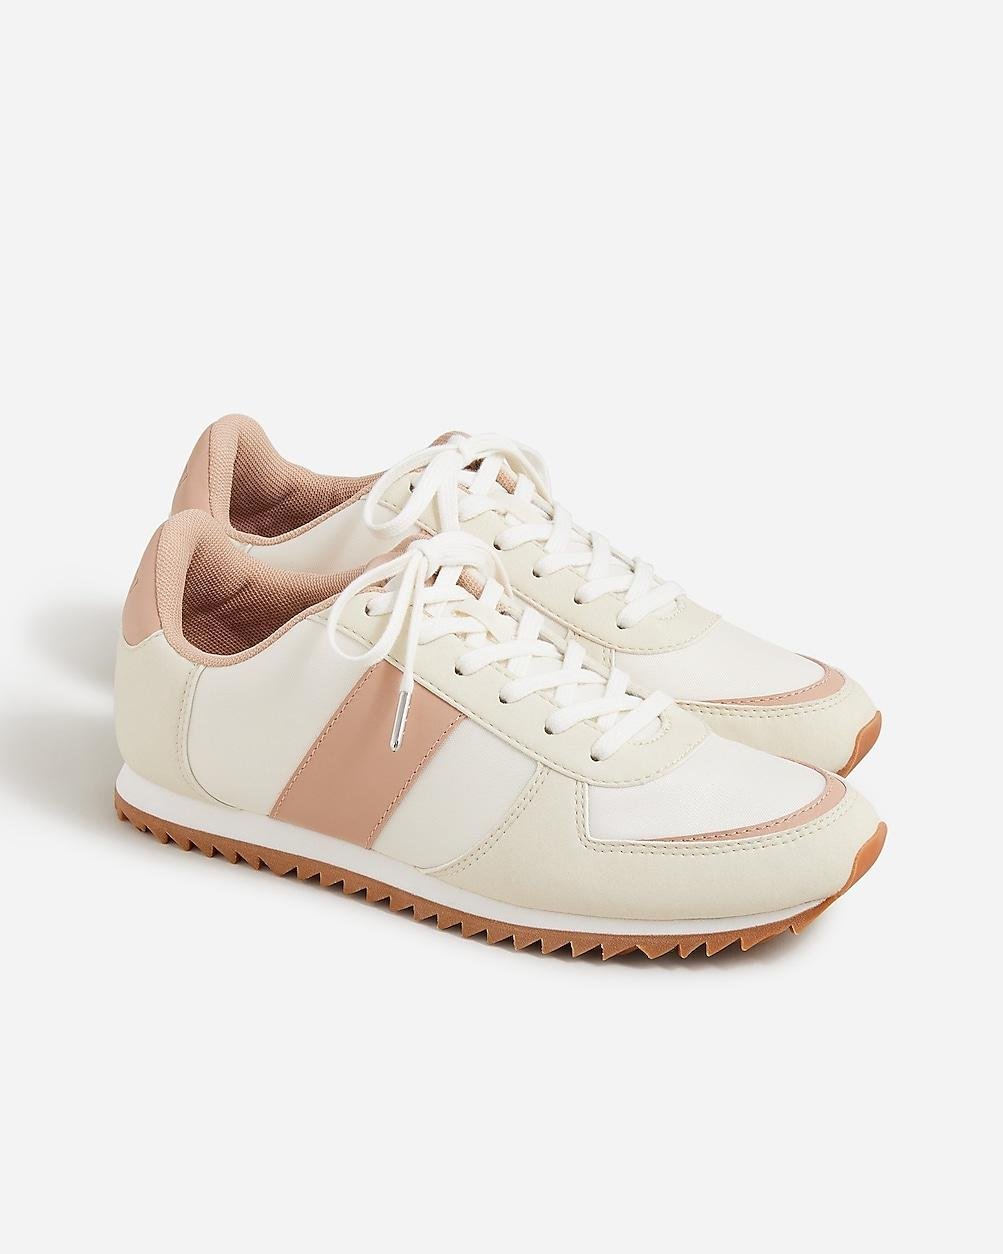 J.Crew trainers in colorblock by J.CREW